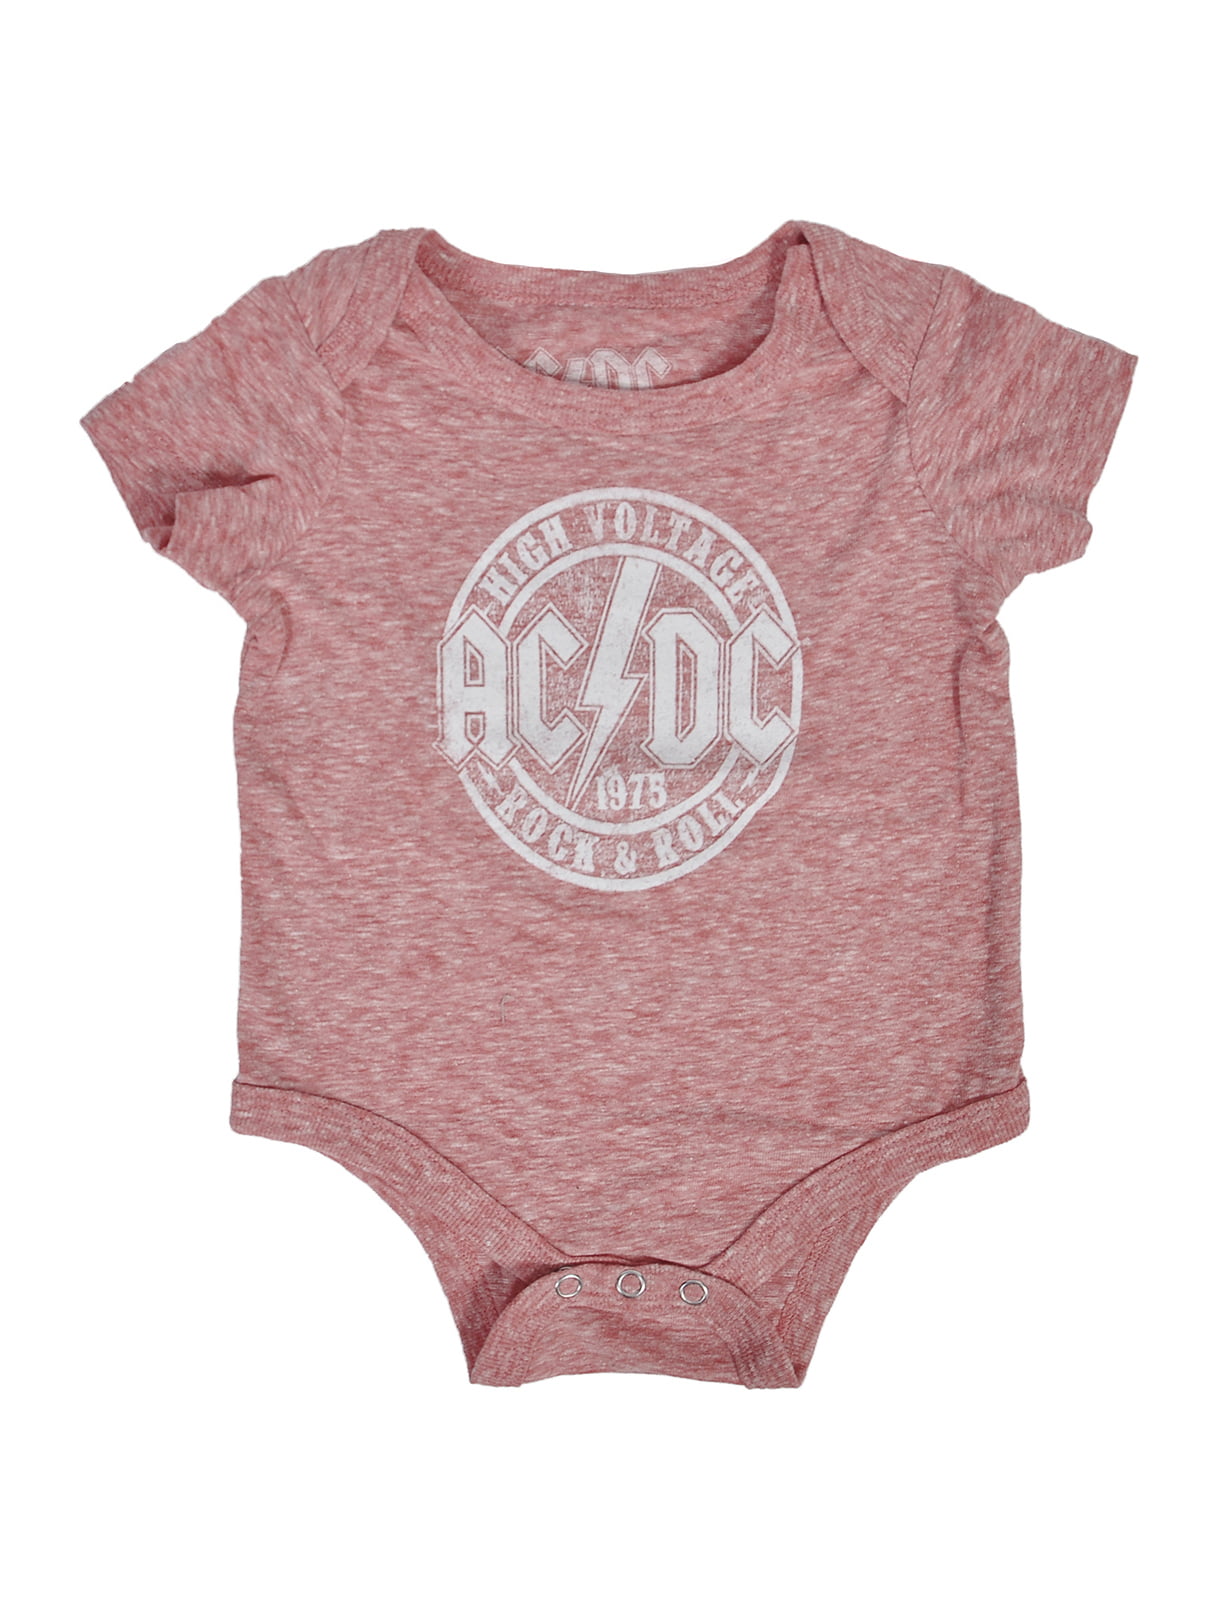 AC//DC Infant Bodysuit For Those About To Rock Heather Romper